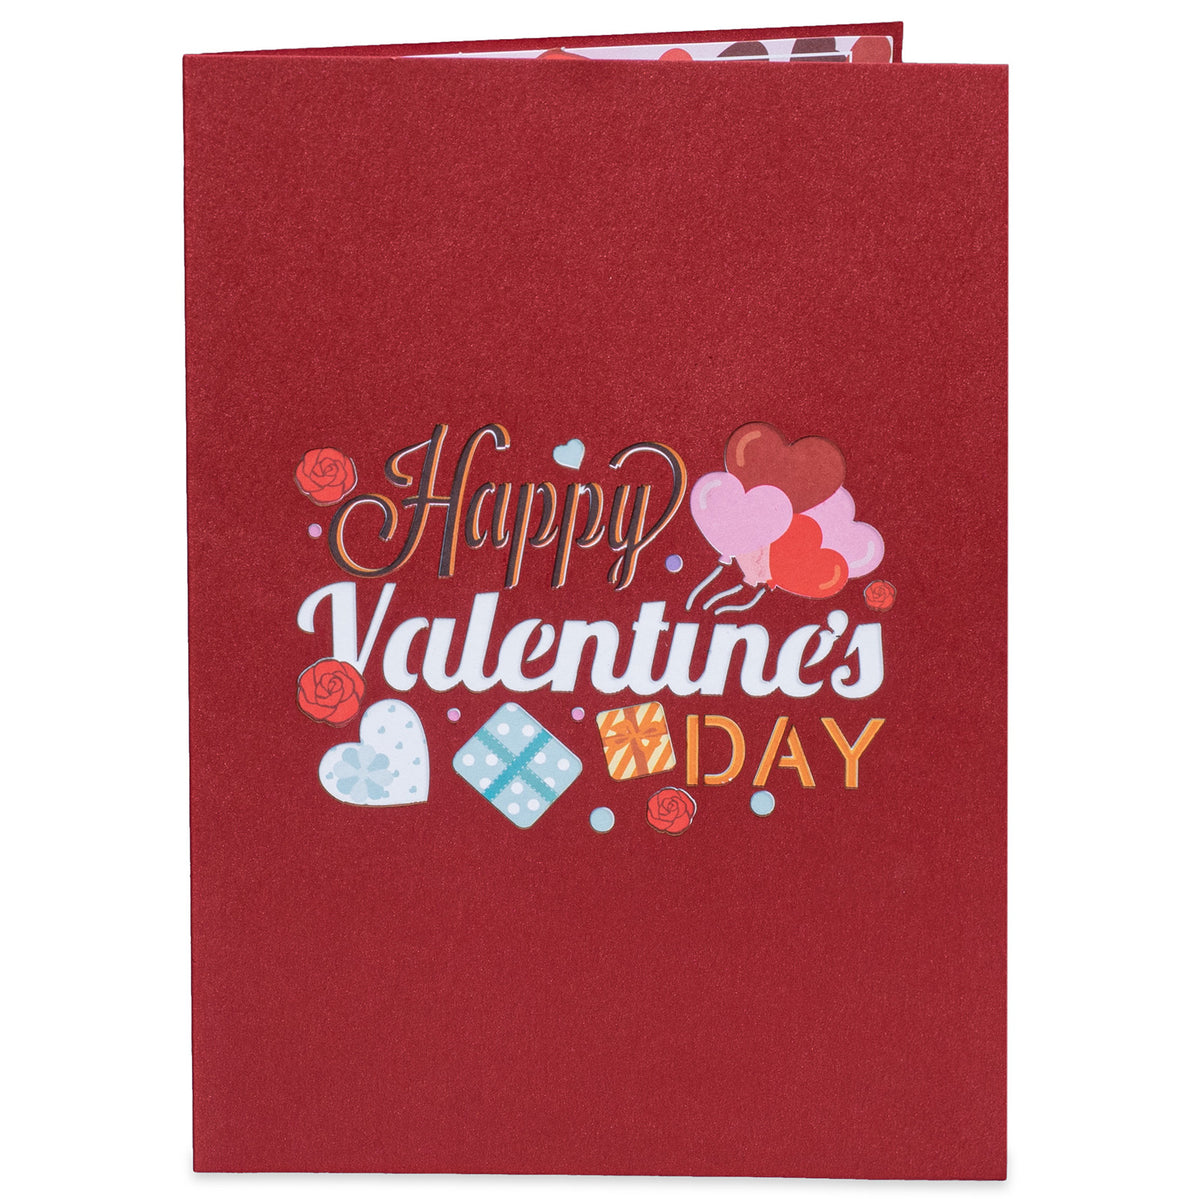 Birthday Valentine's Day Thank You Card Love Wishing Card Greeting Card  Paper